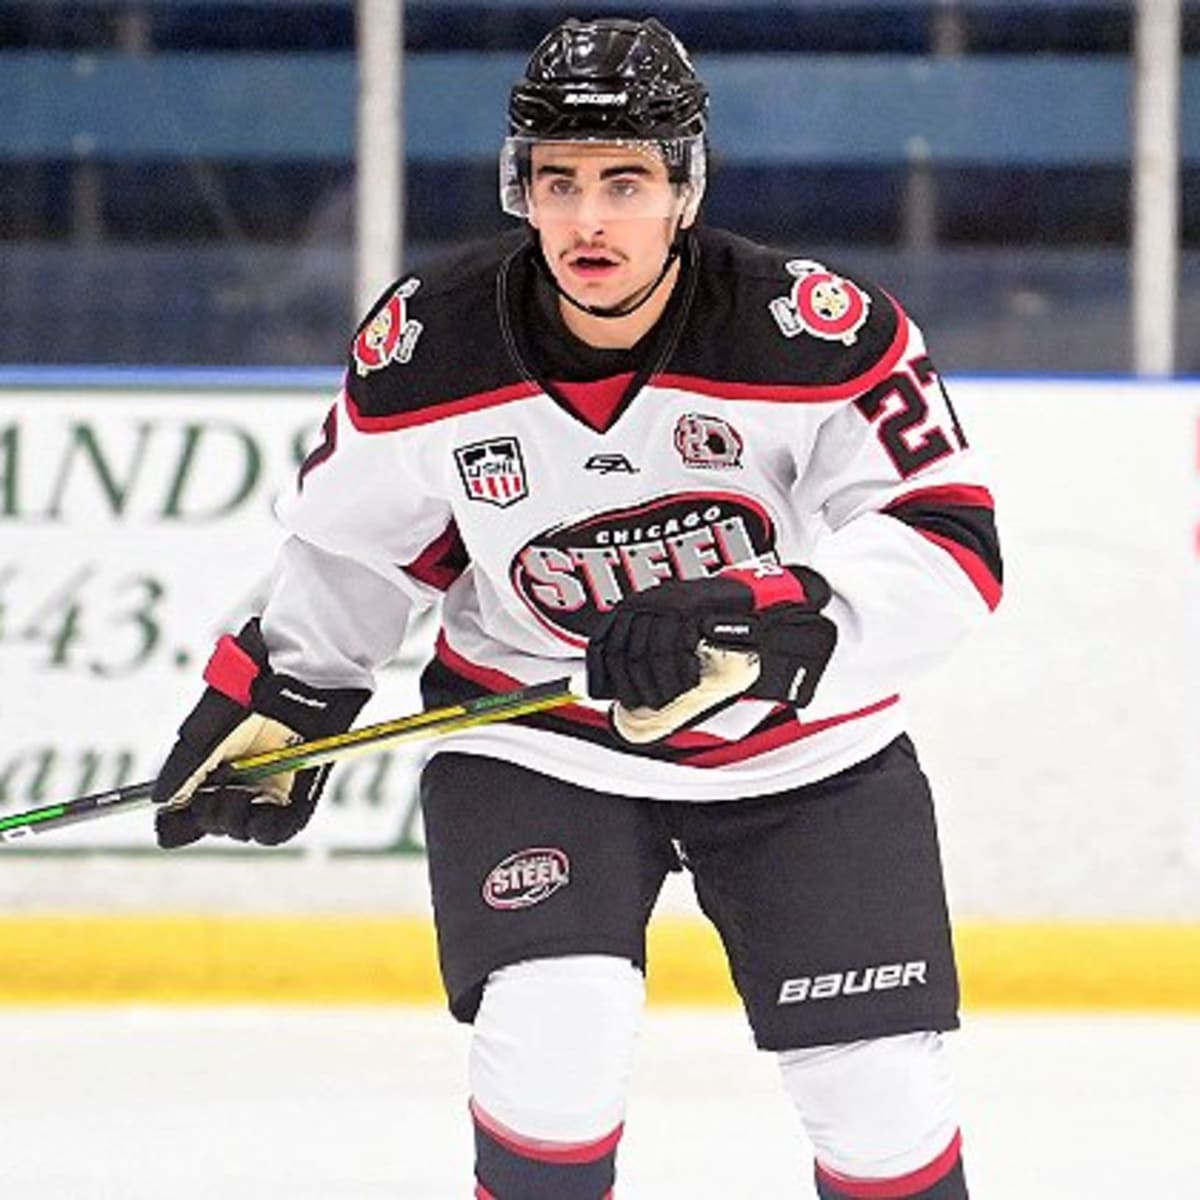 May 21, 2021: Chicago Steel forward Jack Harvey (13) plays the